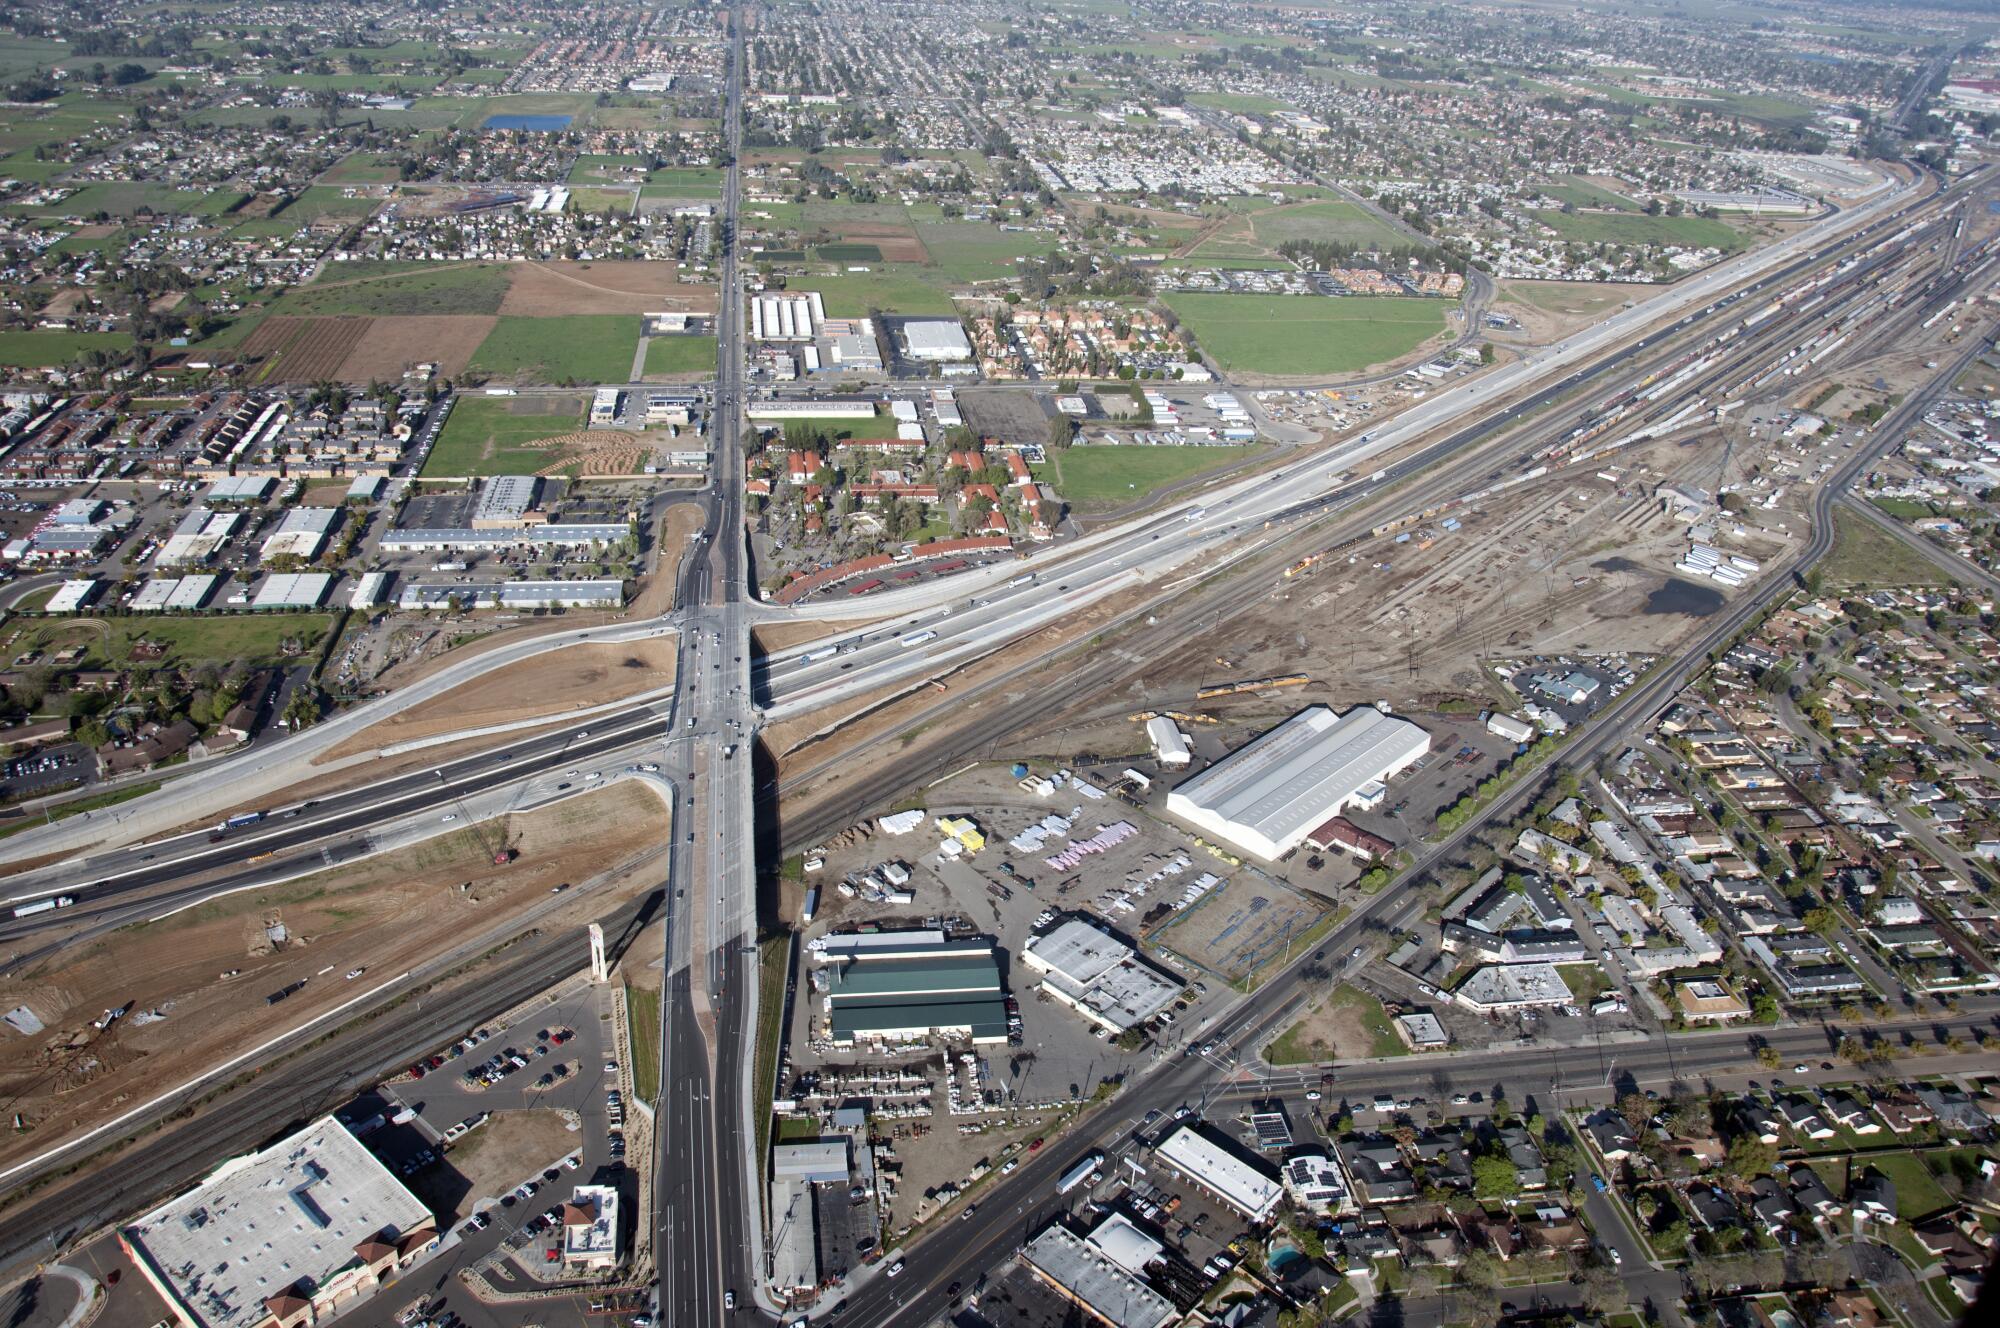 Aerial view of a highway realignment project surrounded by residential and commercial areas